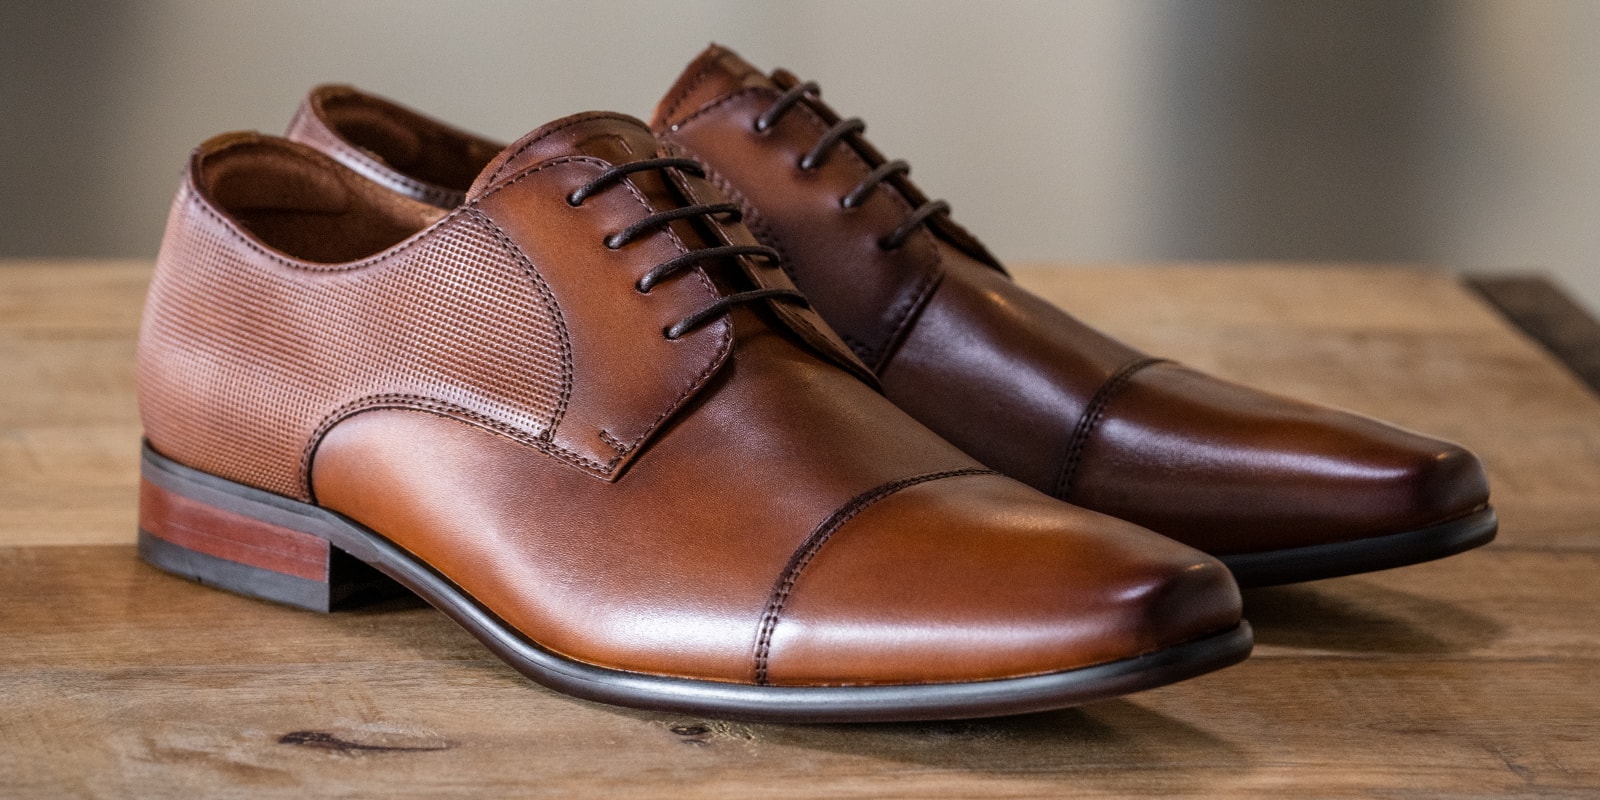 The featured product is the Postino Cap Toe Oxford in Cognac.